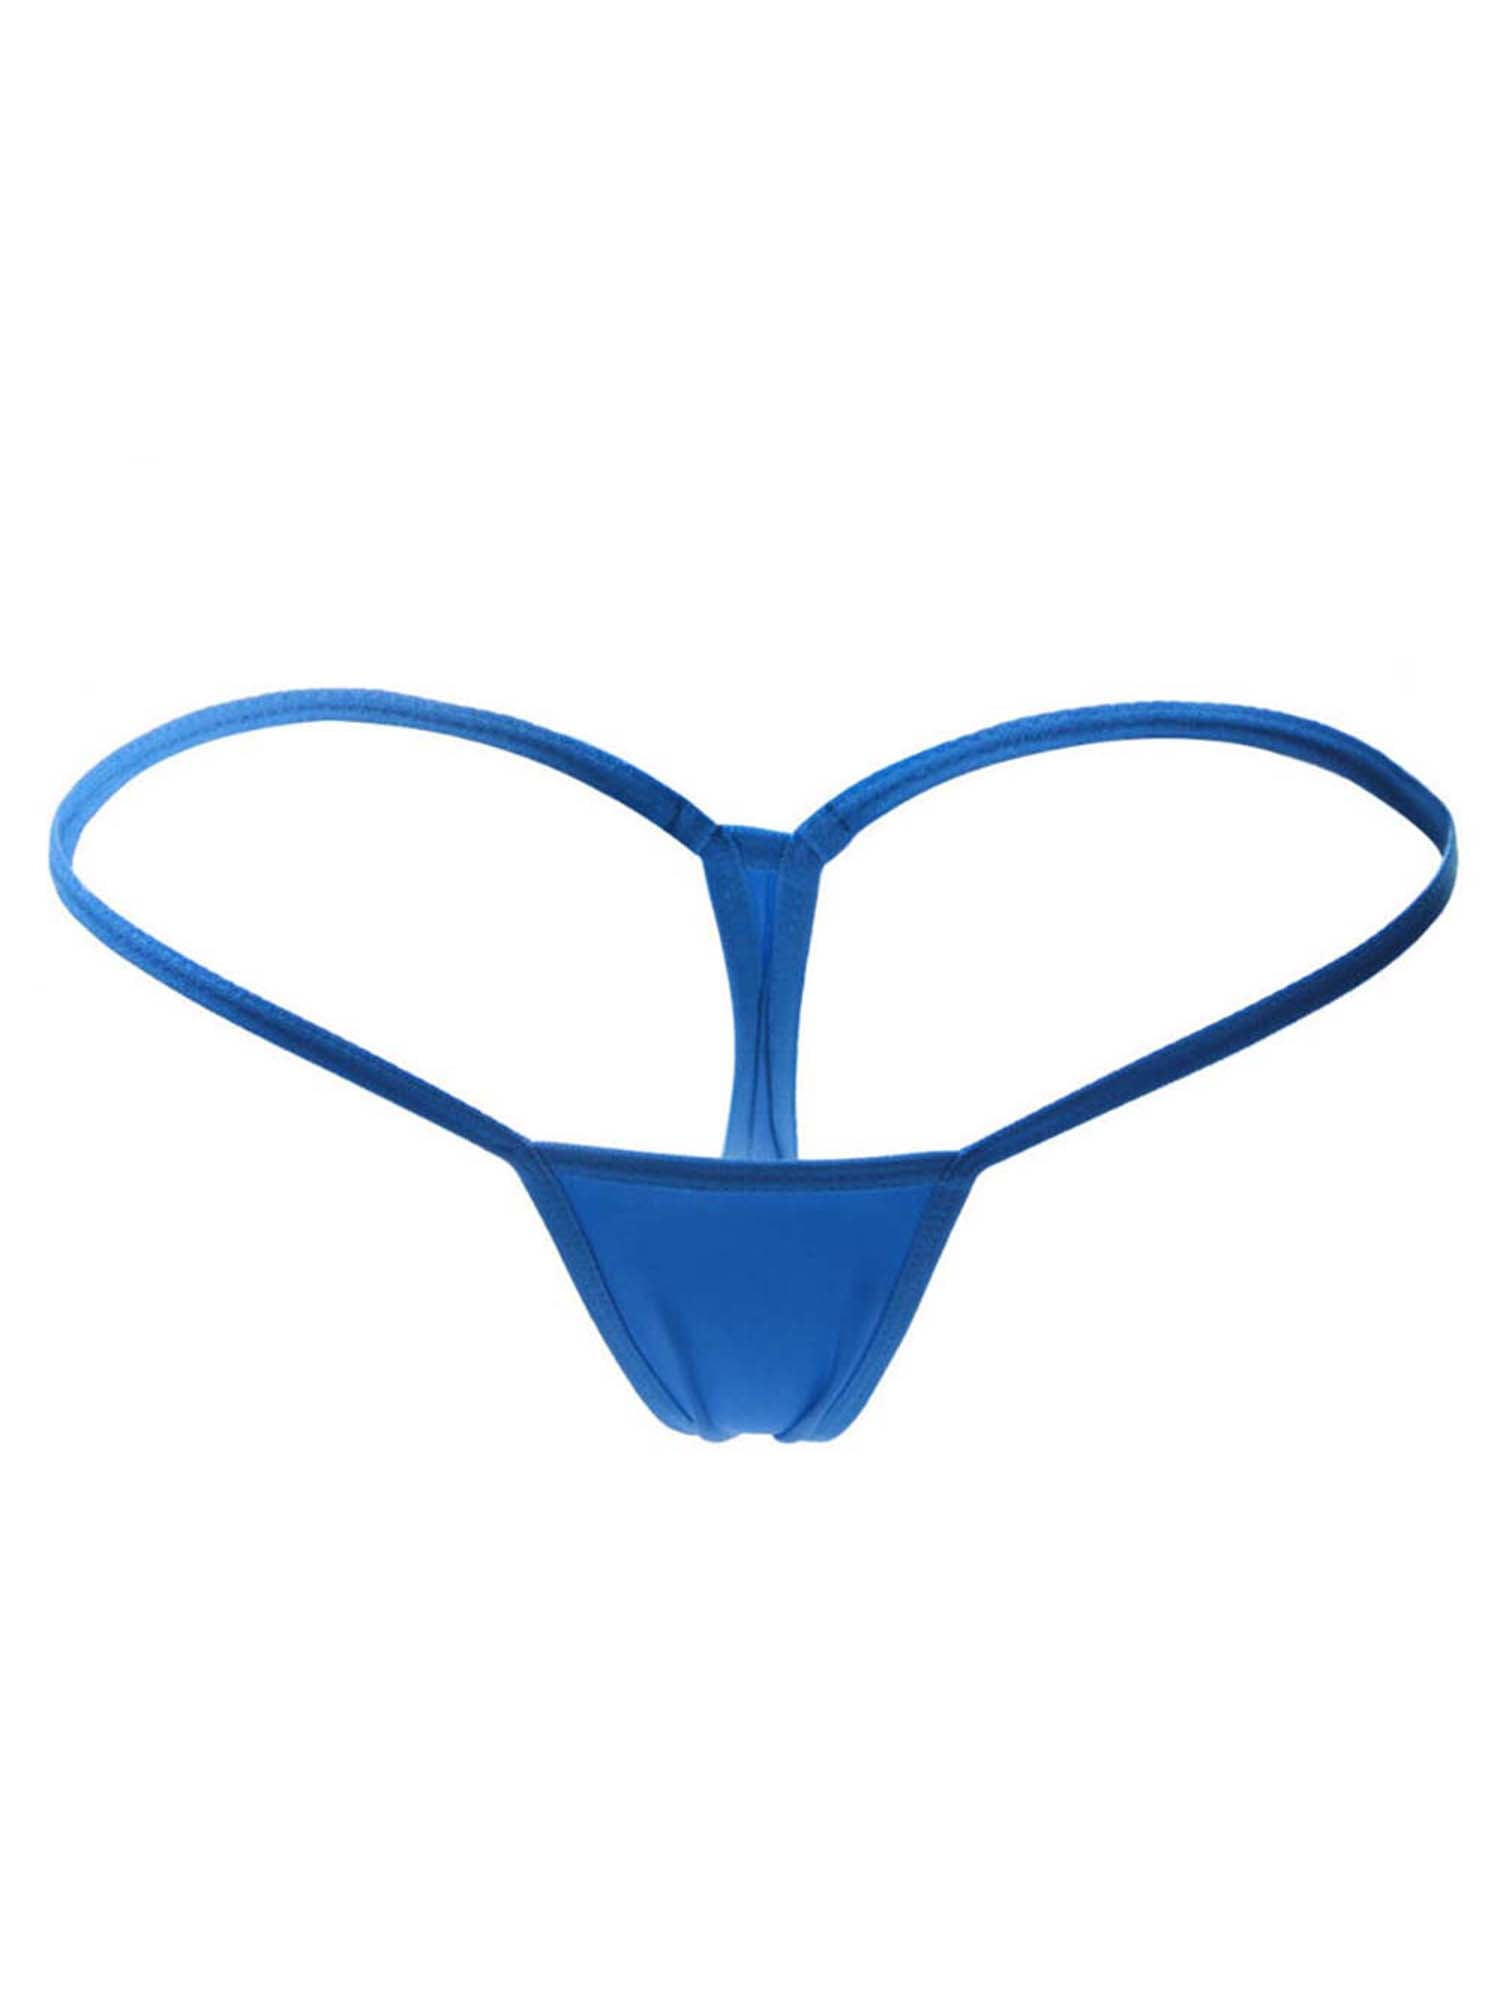 Freebily Mens Embroidery G-String Thong Panties Sissy Underpants Lace-up Hollow Out Briefs Underwear